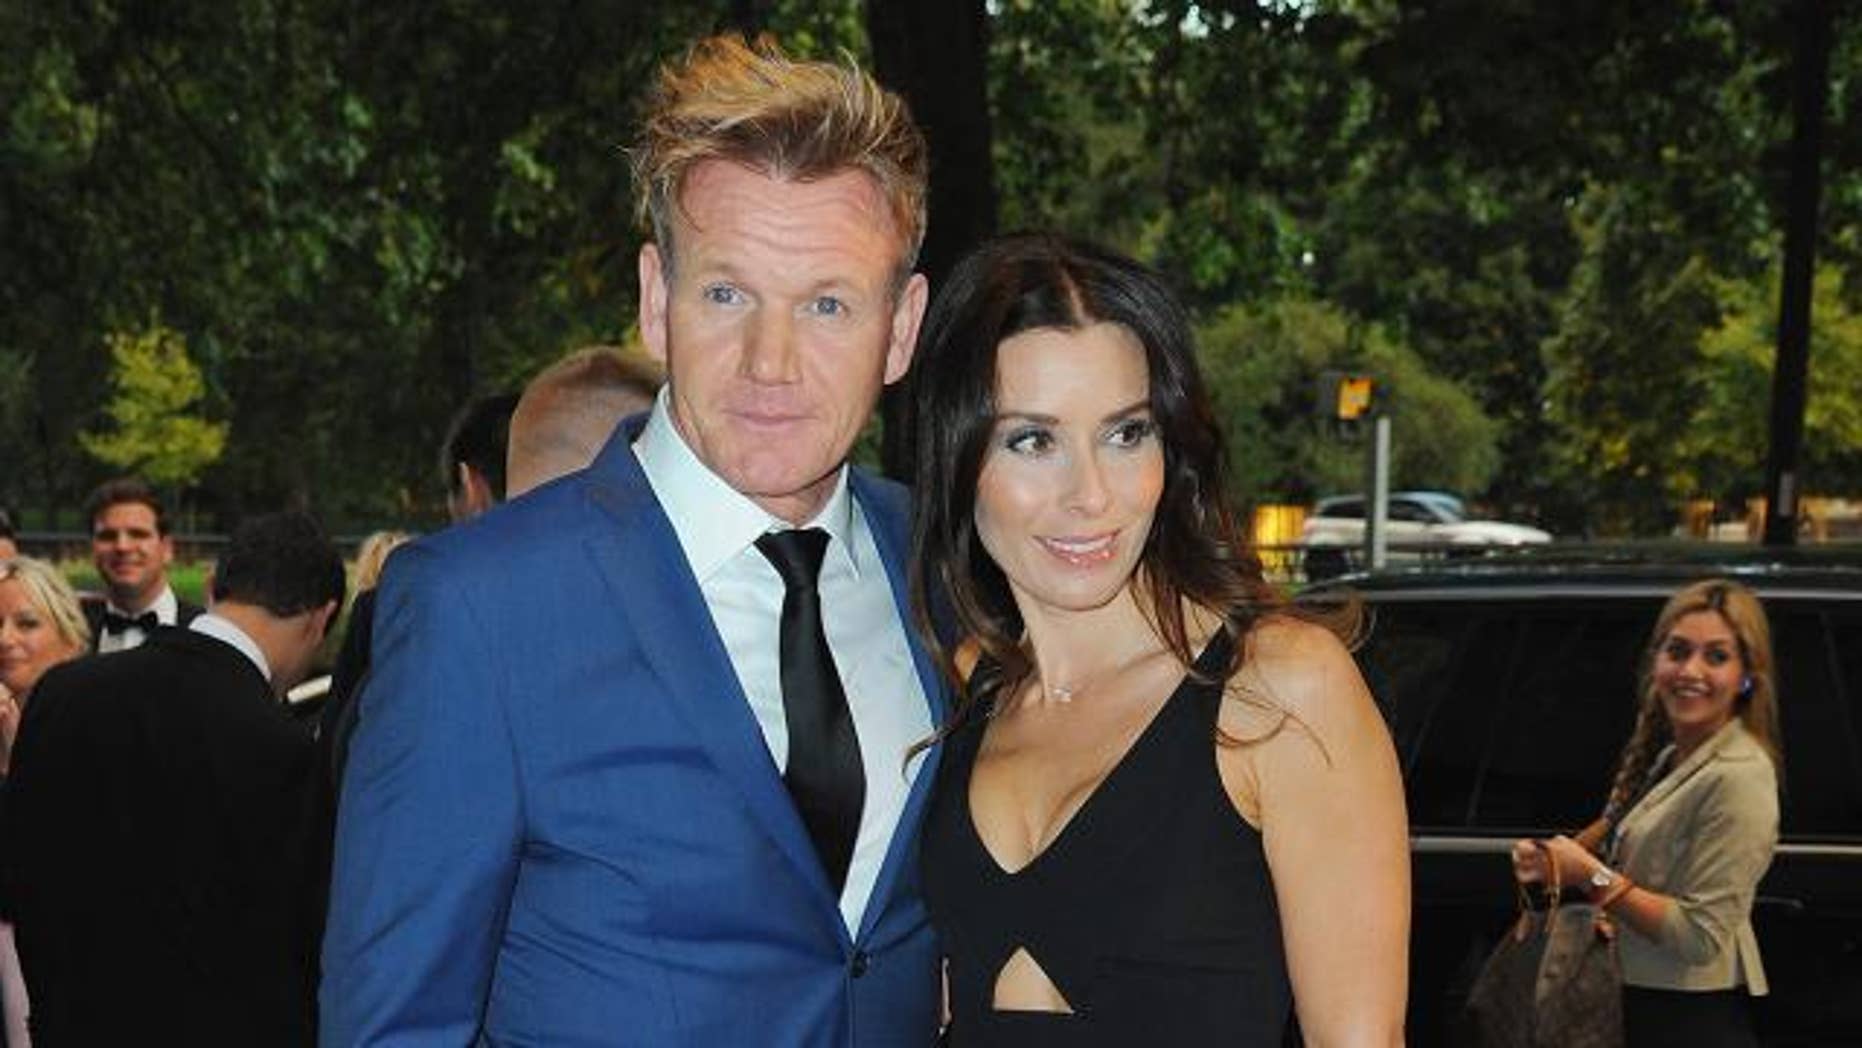 Gordon Ramsay and wife Tana expecting baby No. 5 two years after tragic miscarriage